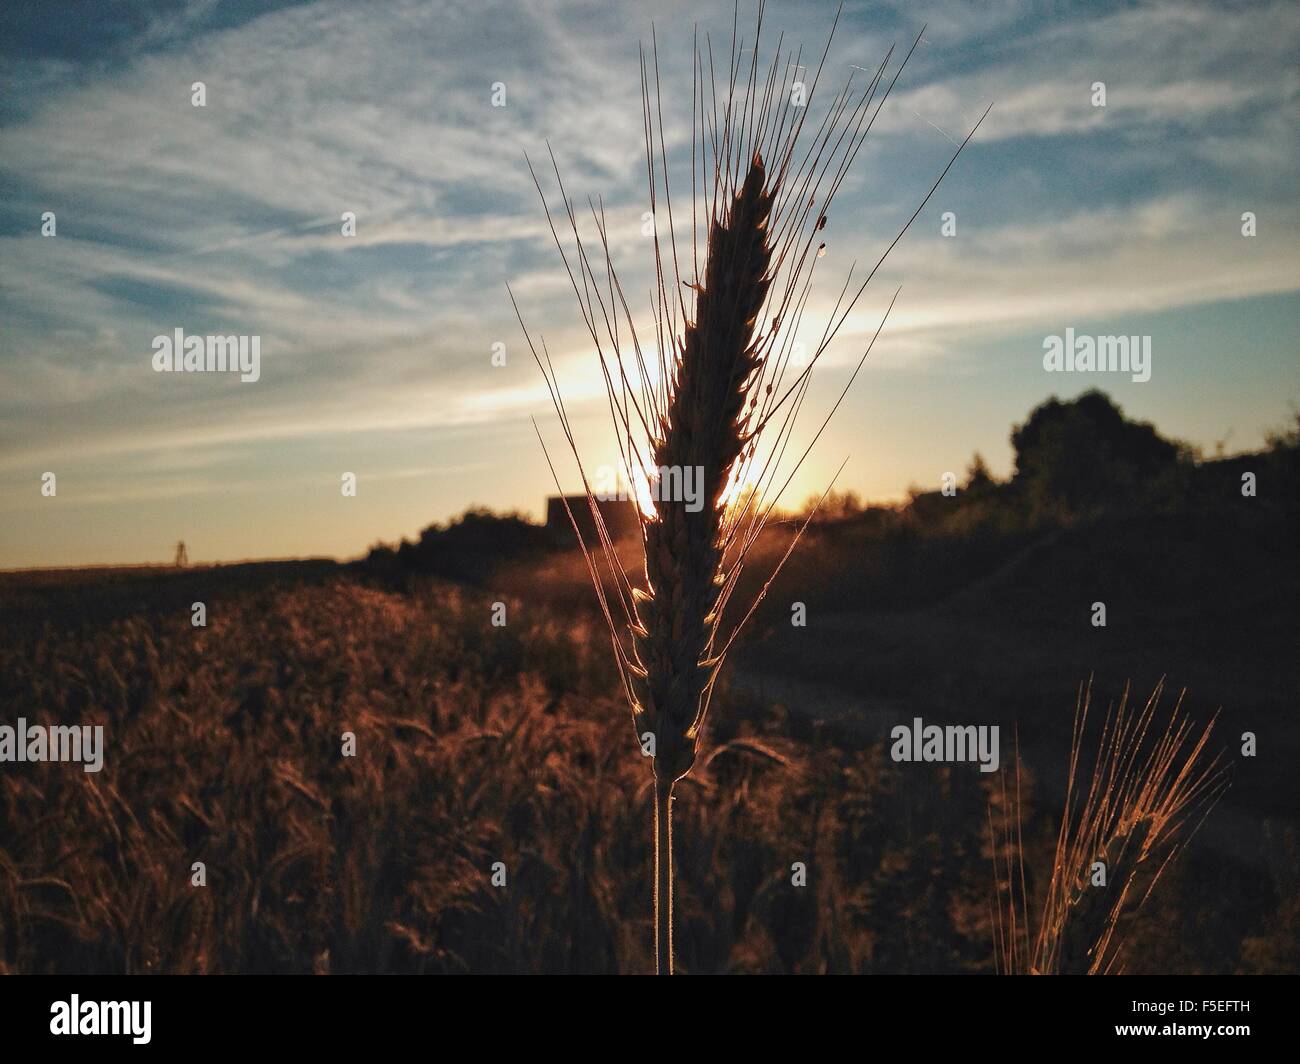 Silhouette of wheat stalk against sunset Stock Photo